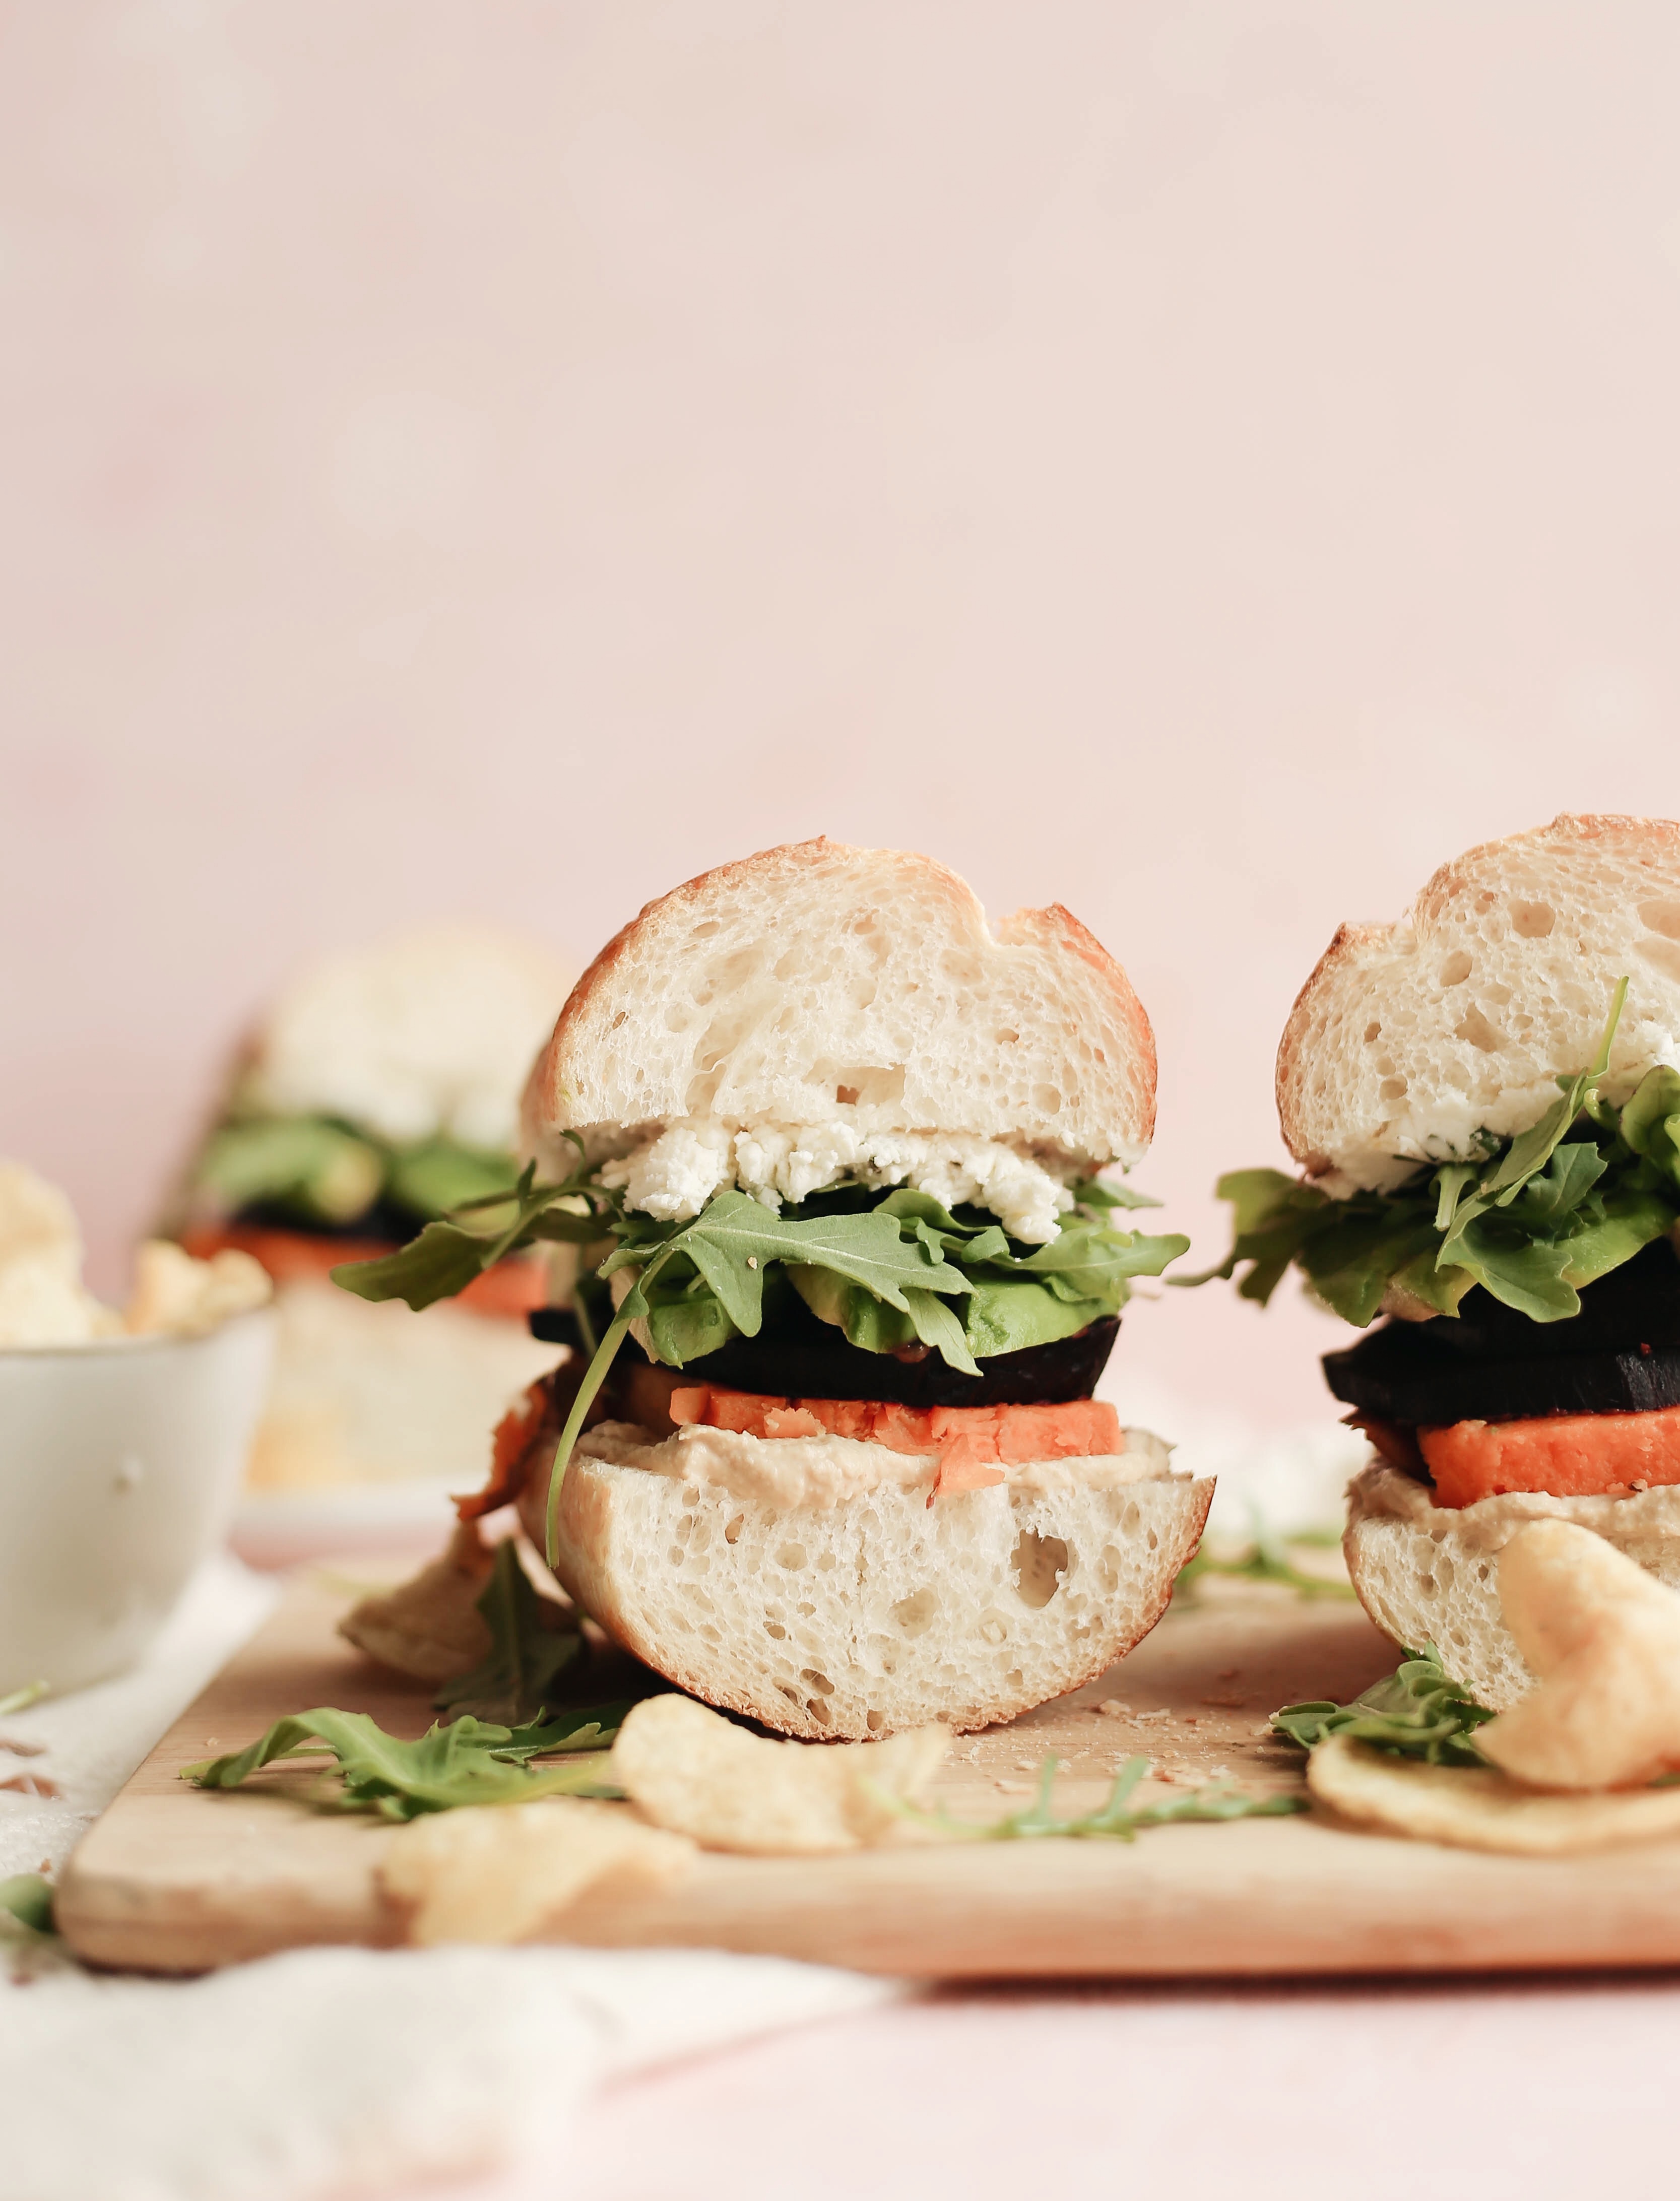 The Root Veggie Sandwich You Need This Season